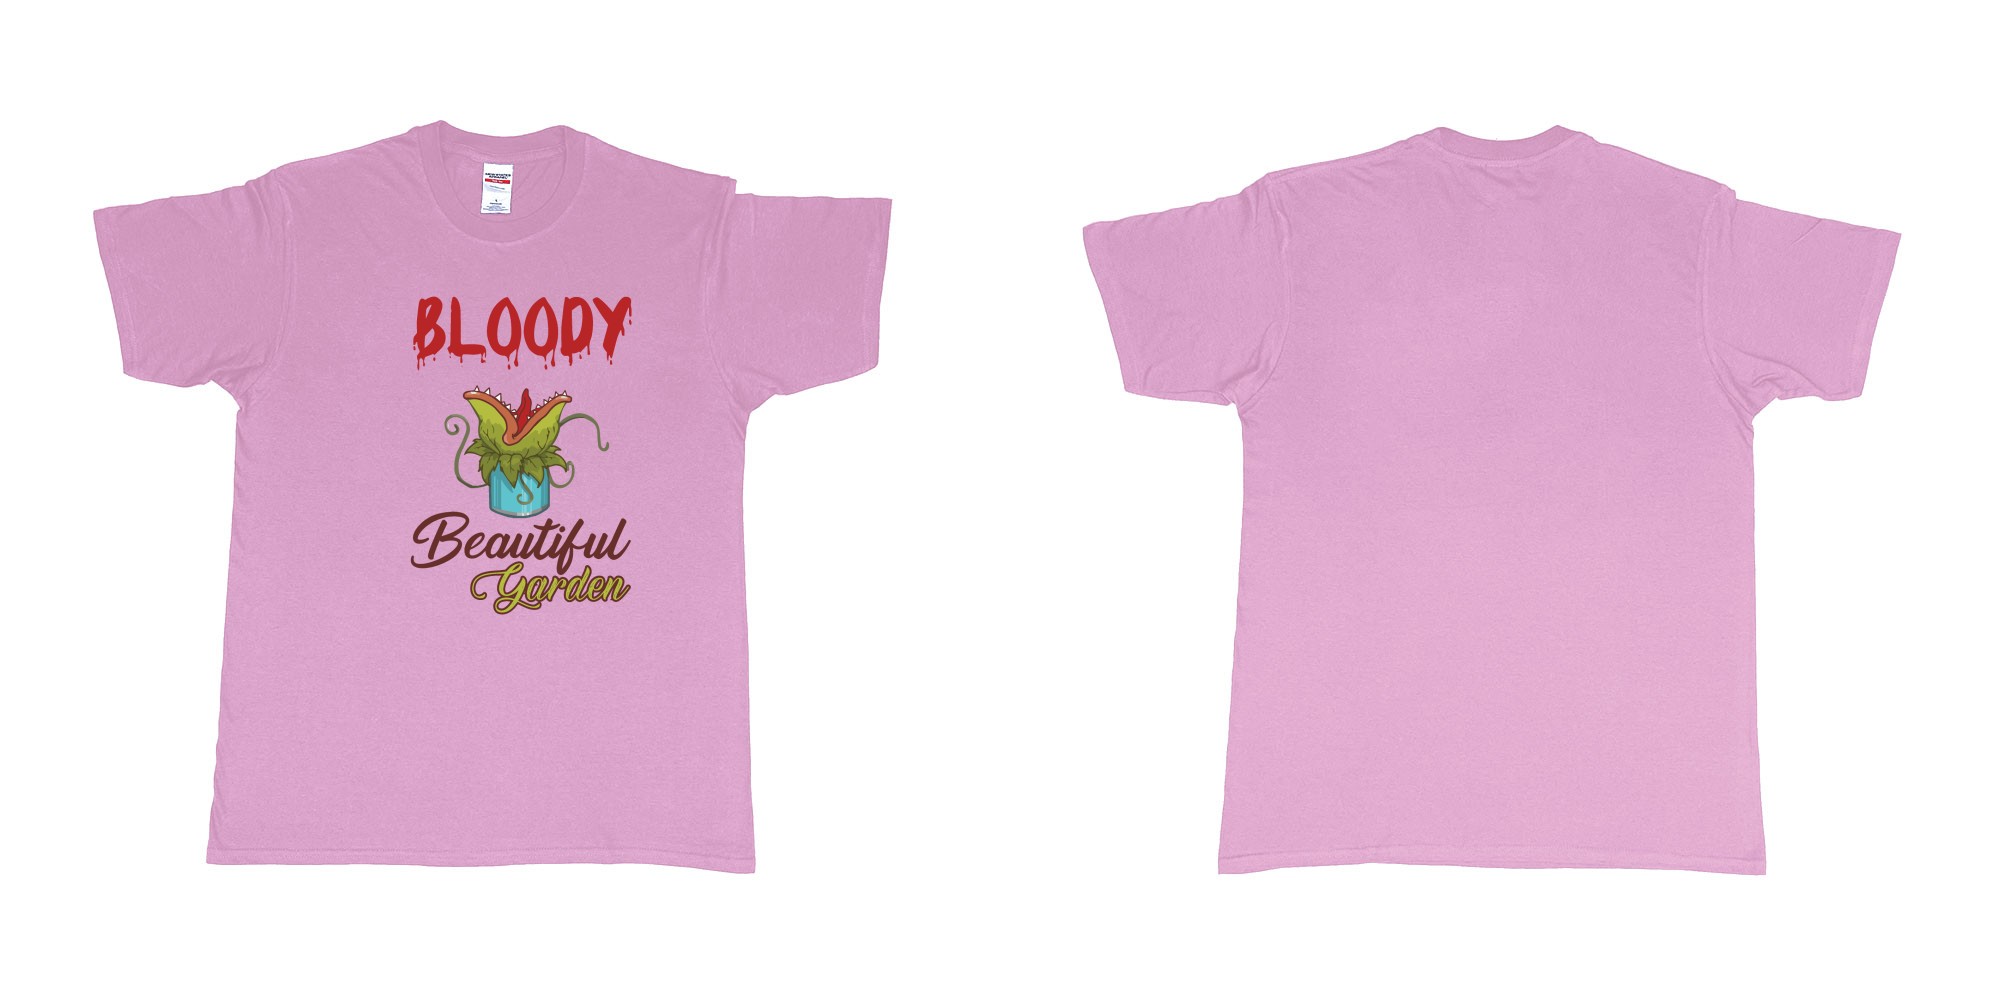 Custom tshirt design bloody beautiful garden little shop of horror in fabric color light-pink choice your own text made in Bali by The Pirate Way